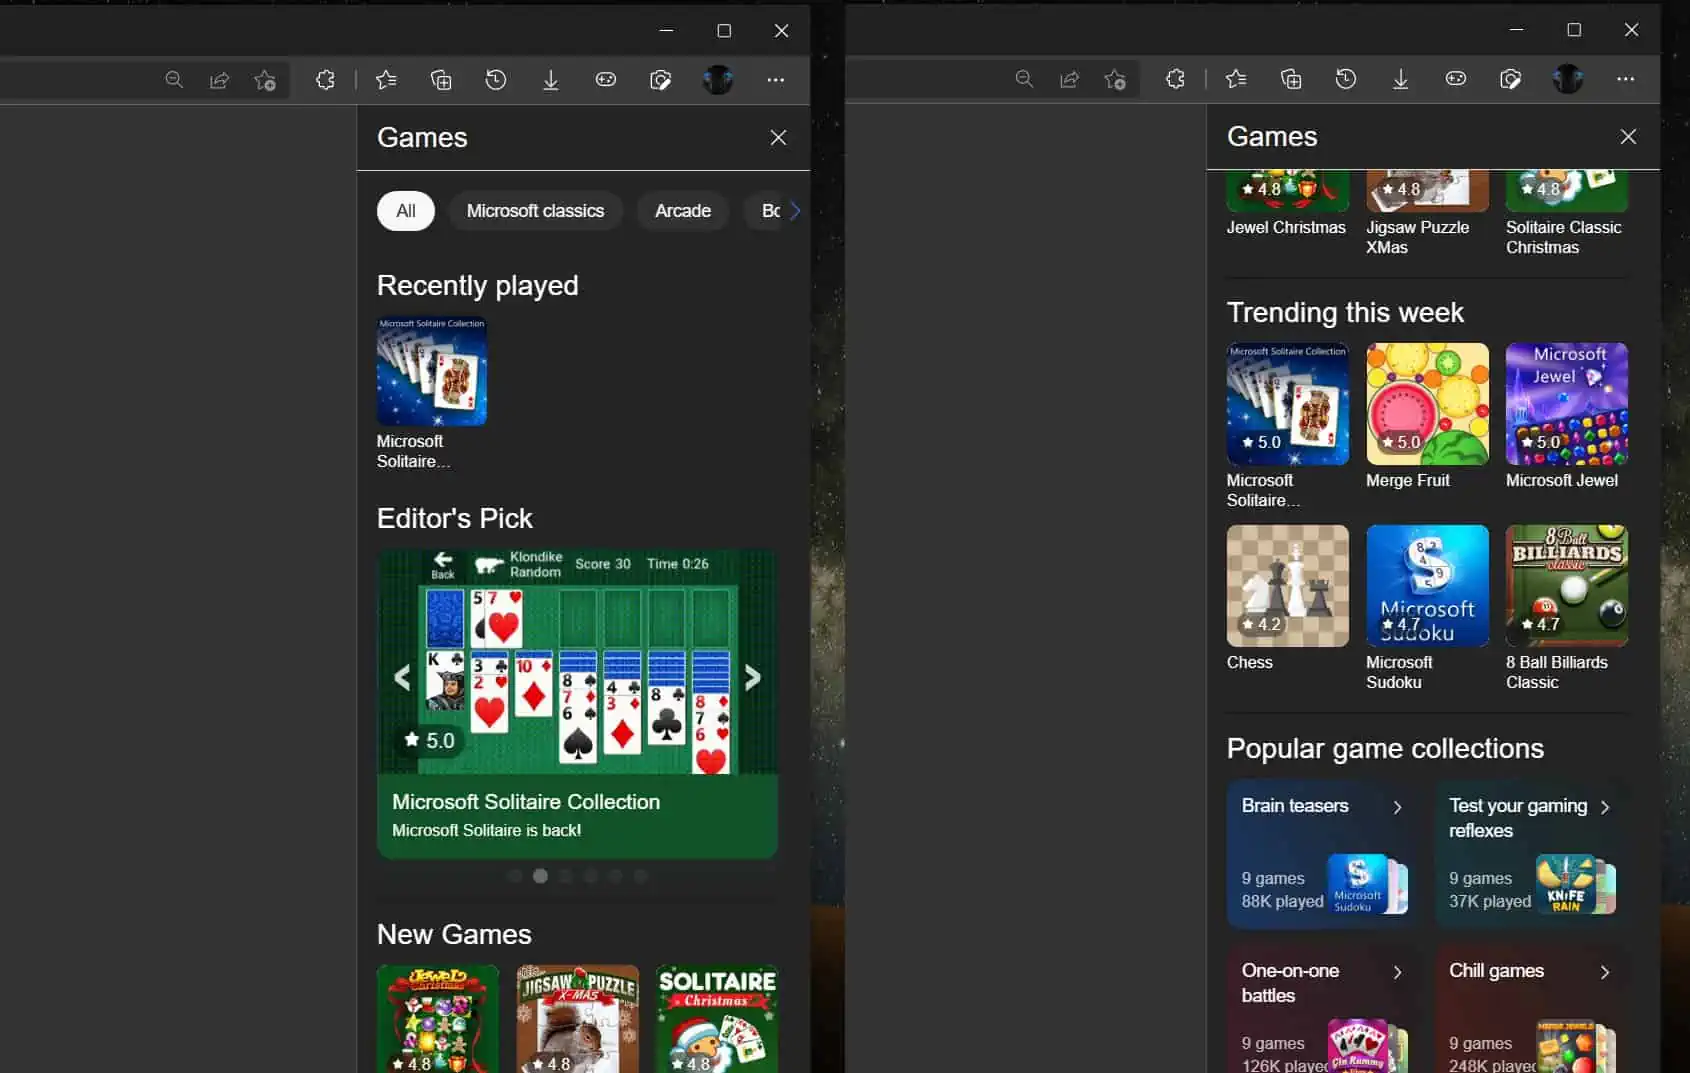 Microsoft brings MSN Games to the Edge browser to help while away your lunch break